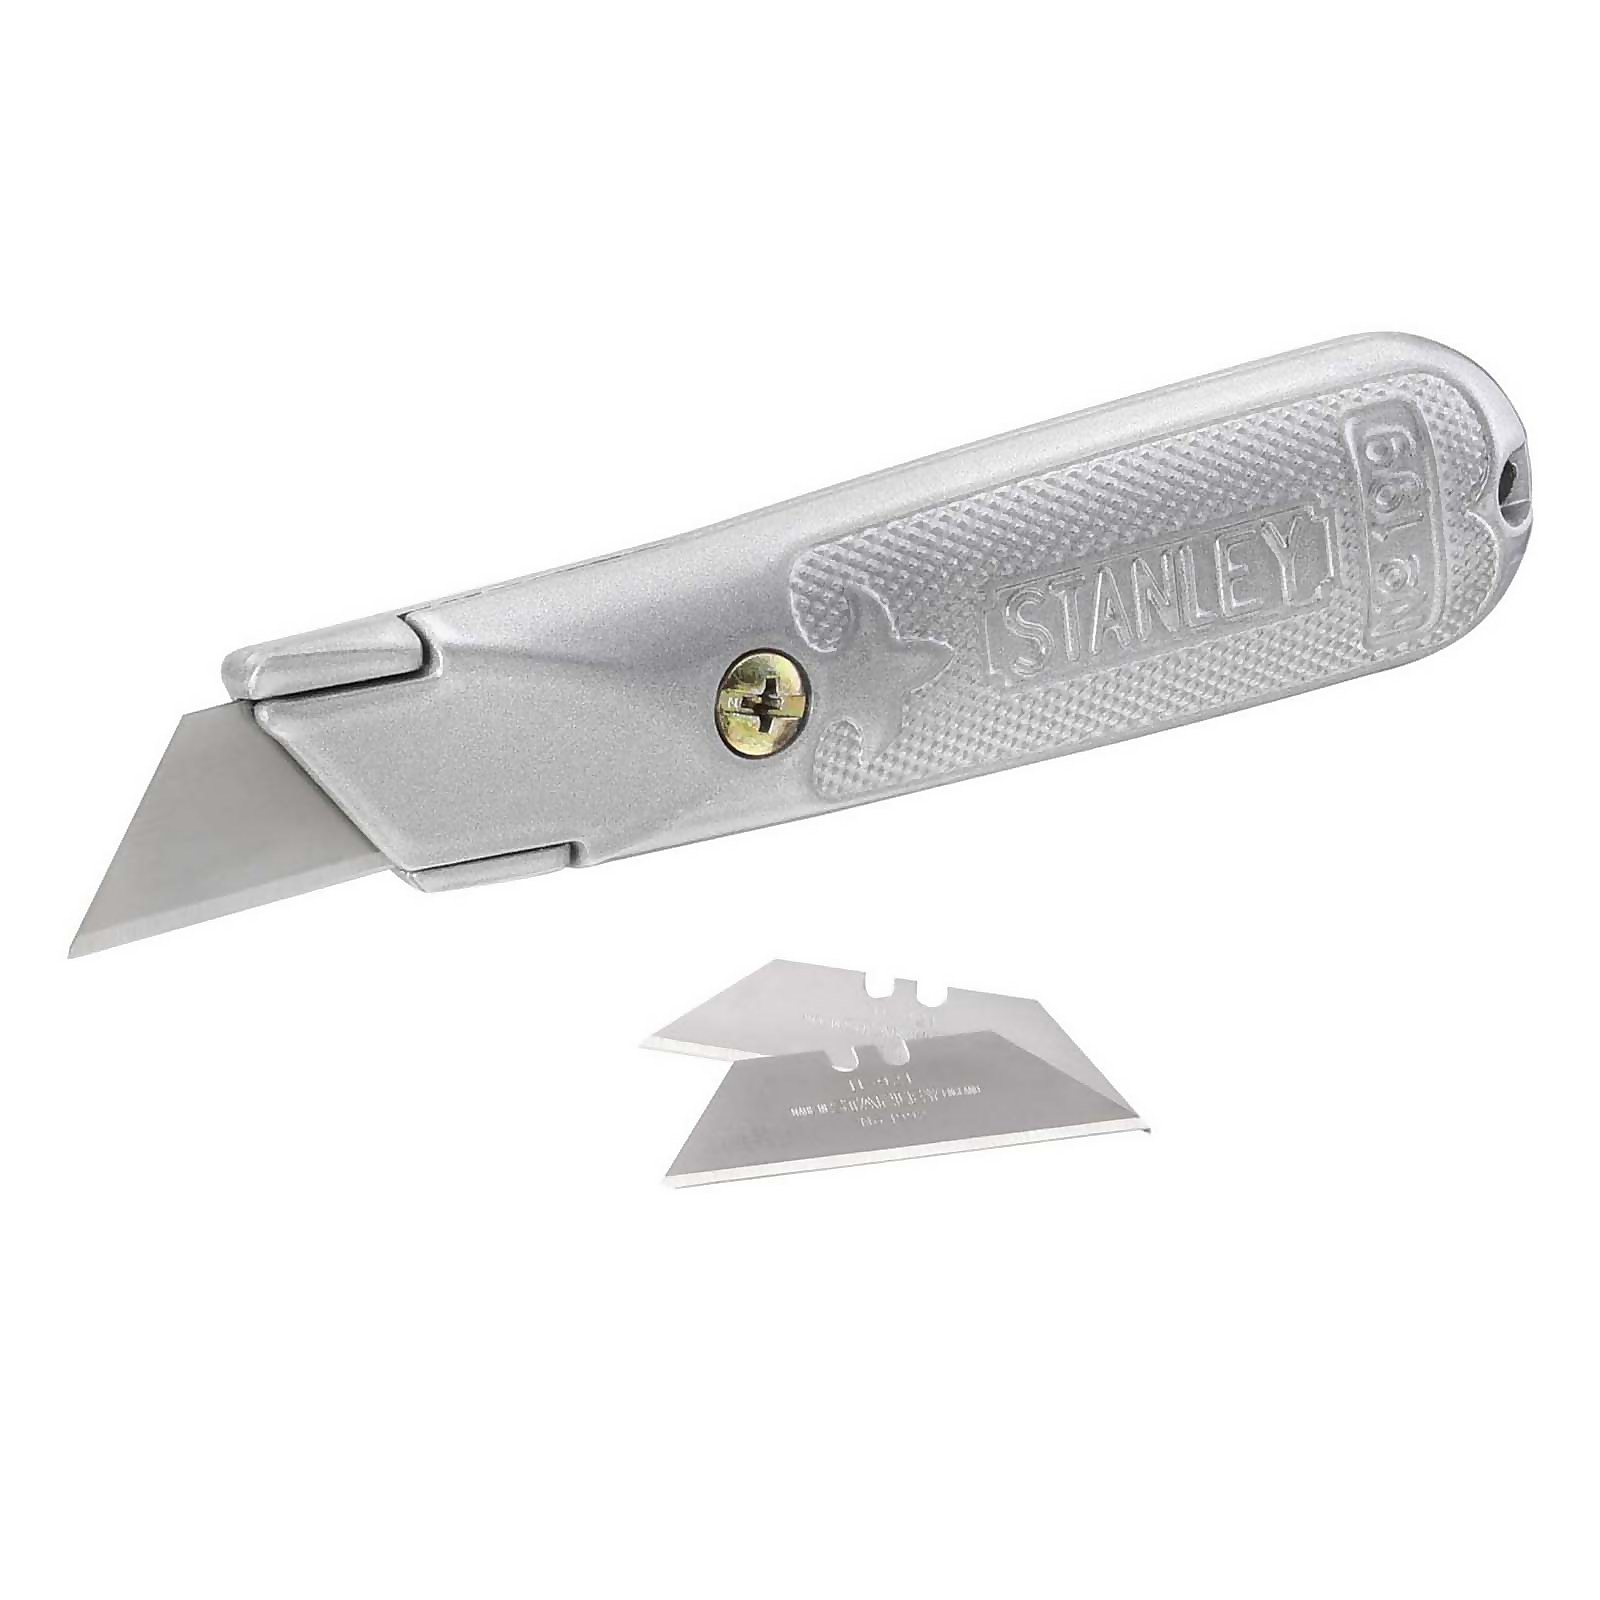 Photo of Stanley 199e Fixed Blade Knife